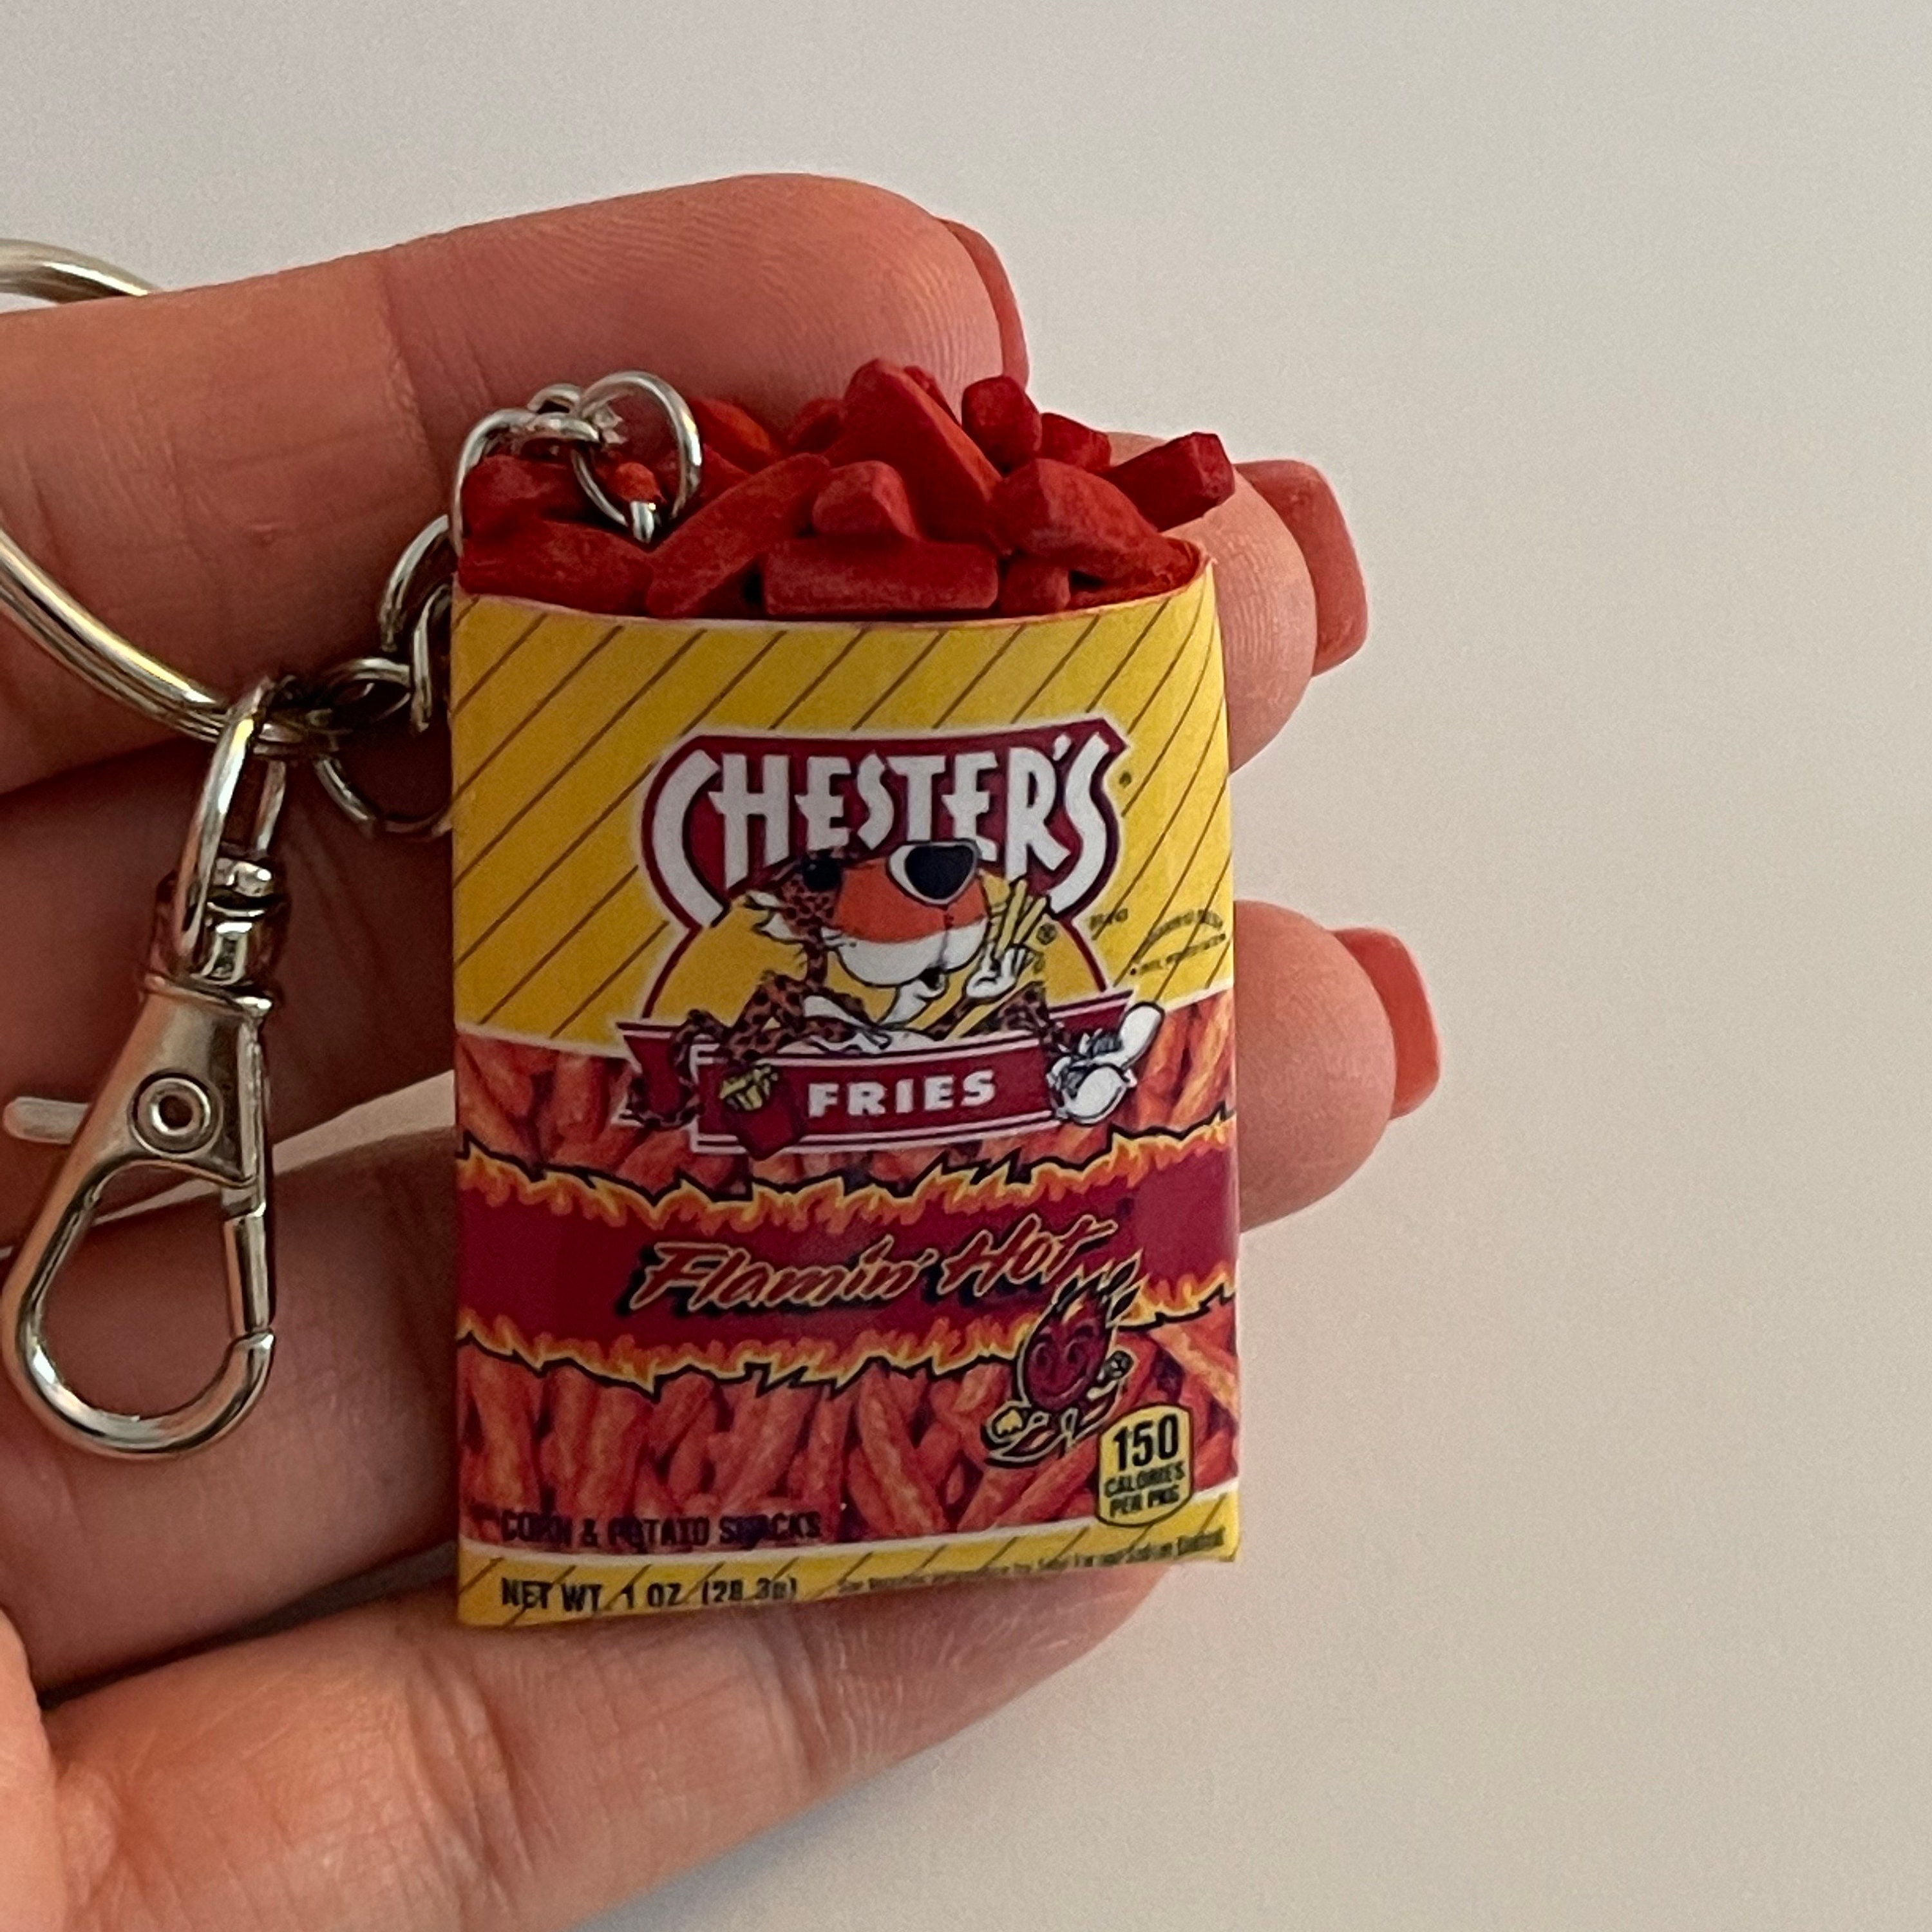 Chesters Hot Fries Pin or Magnet hot Cheetos Hot Fries Pin 